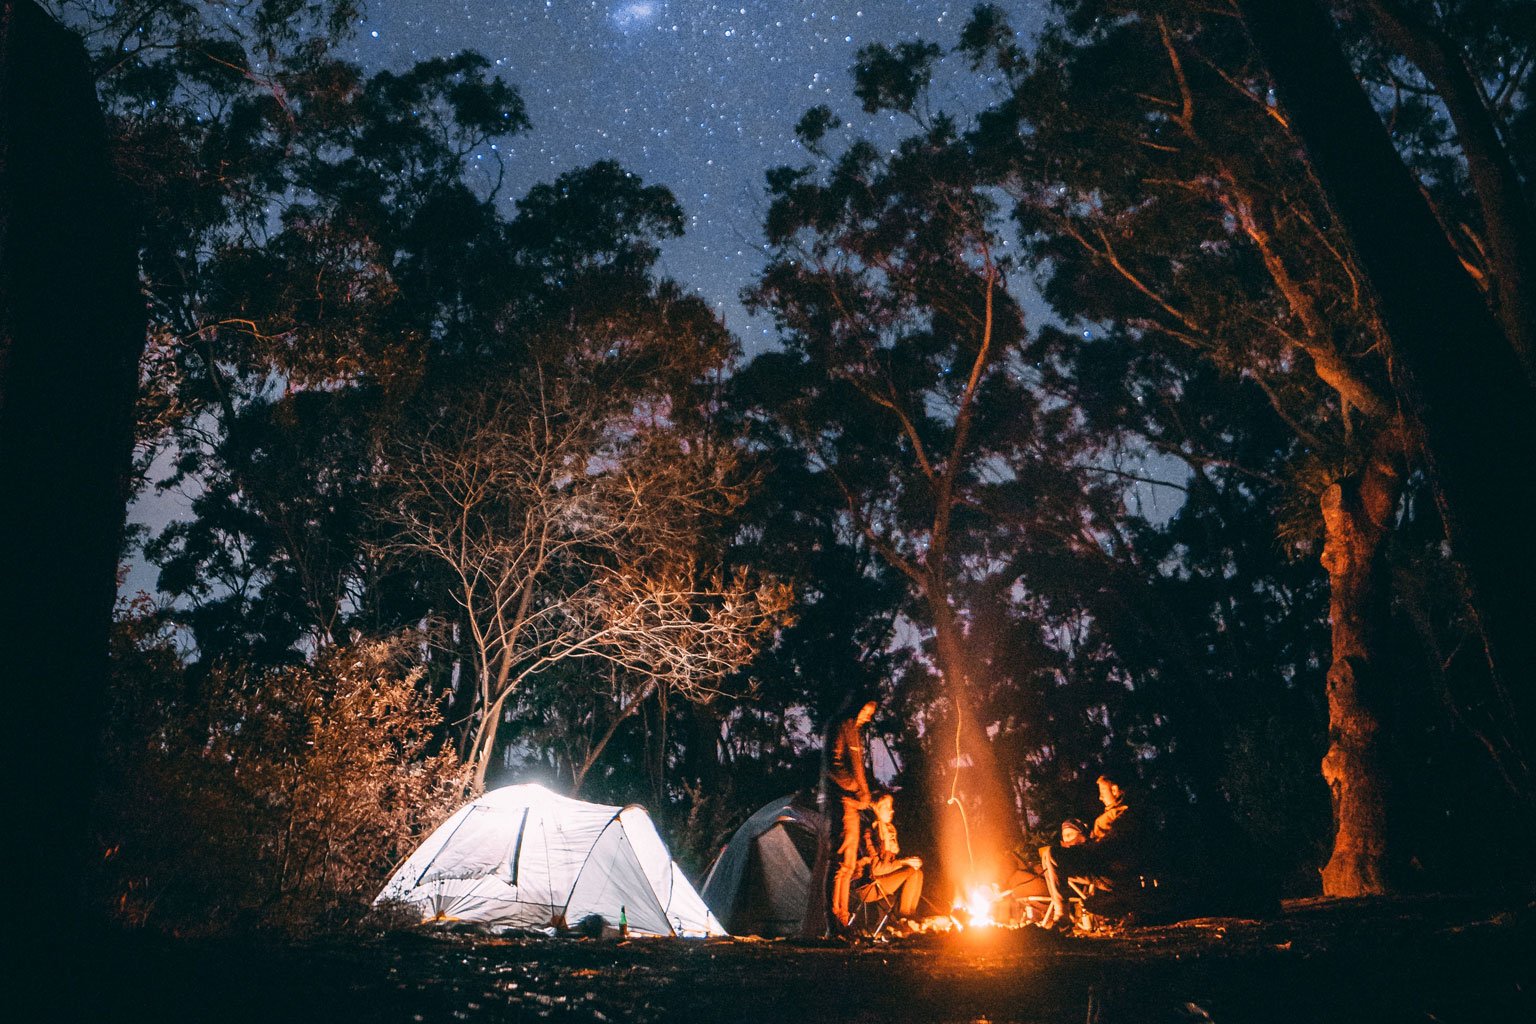 Camping trip: what do I survive in the woods? –